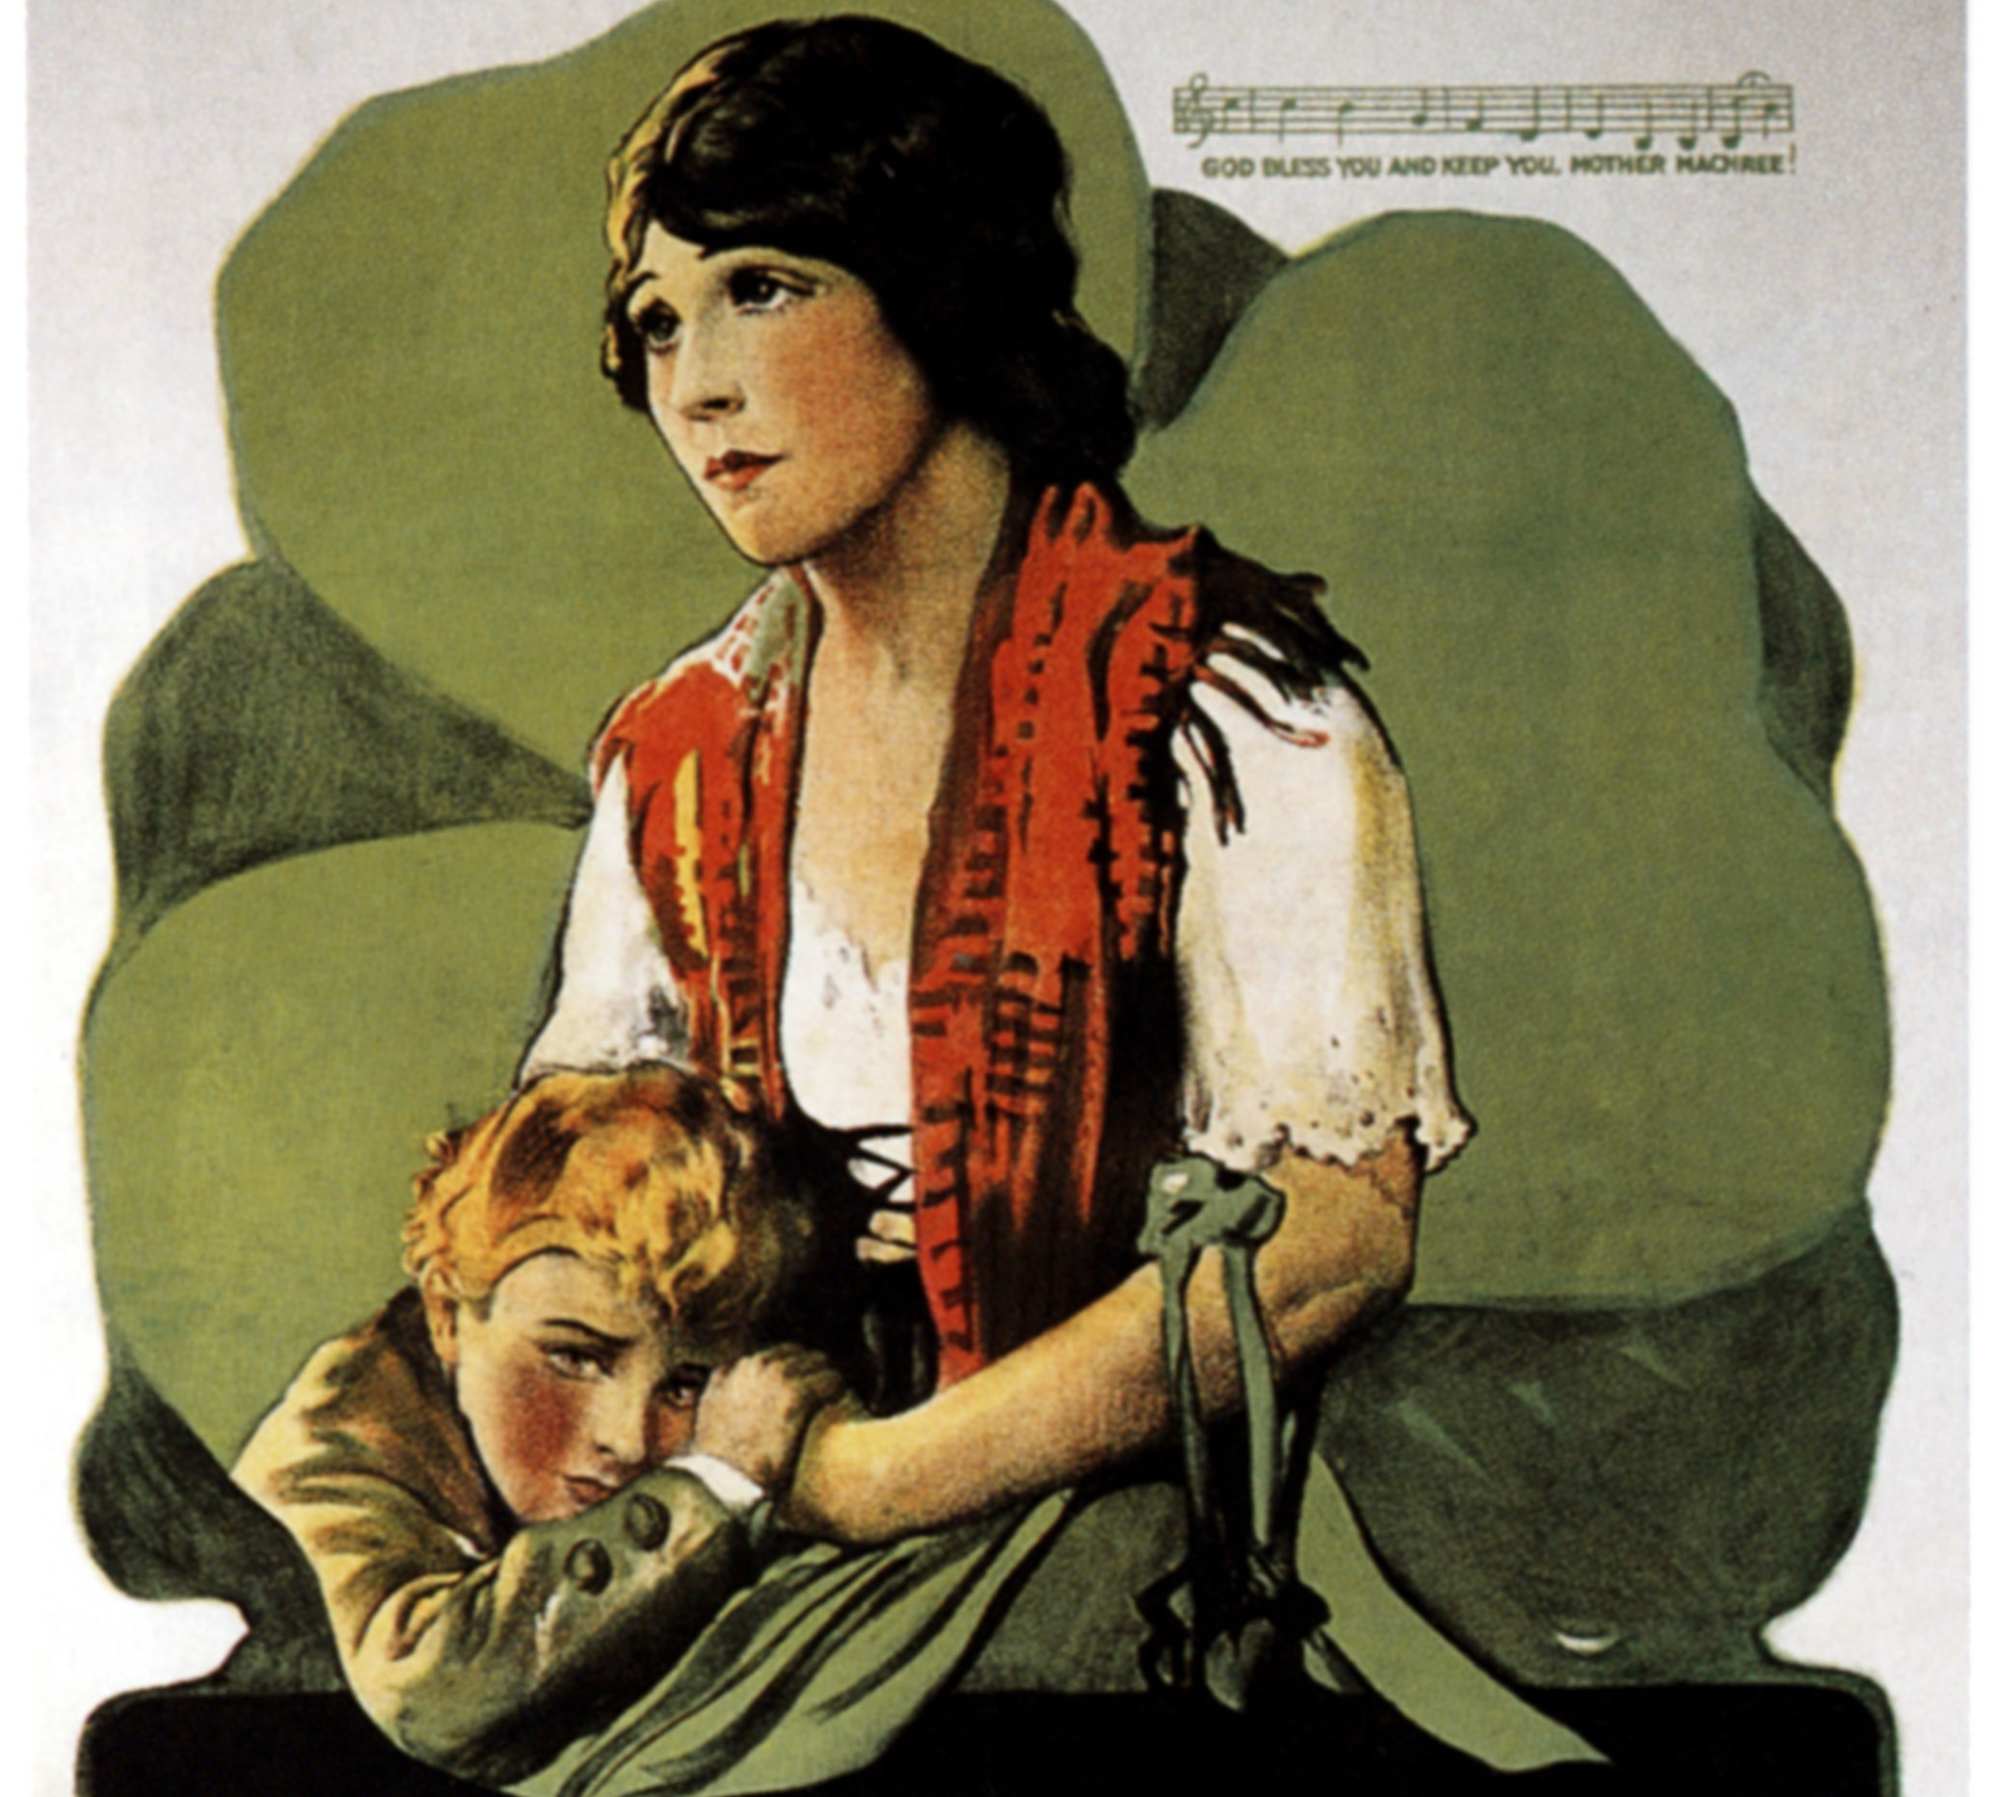 'Mother Machree' Belle Bennett as Mother Machree with a child holding onto her.